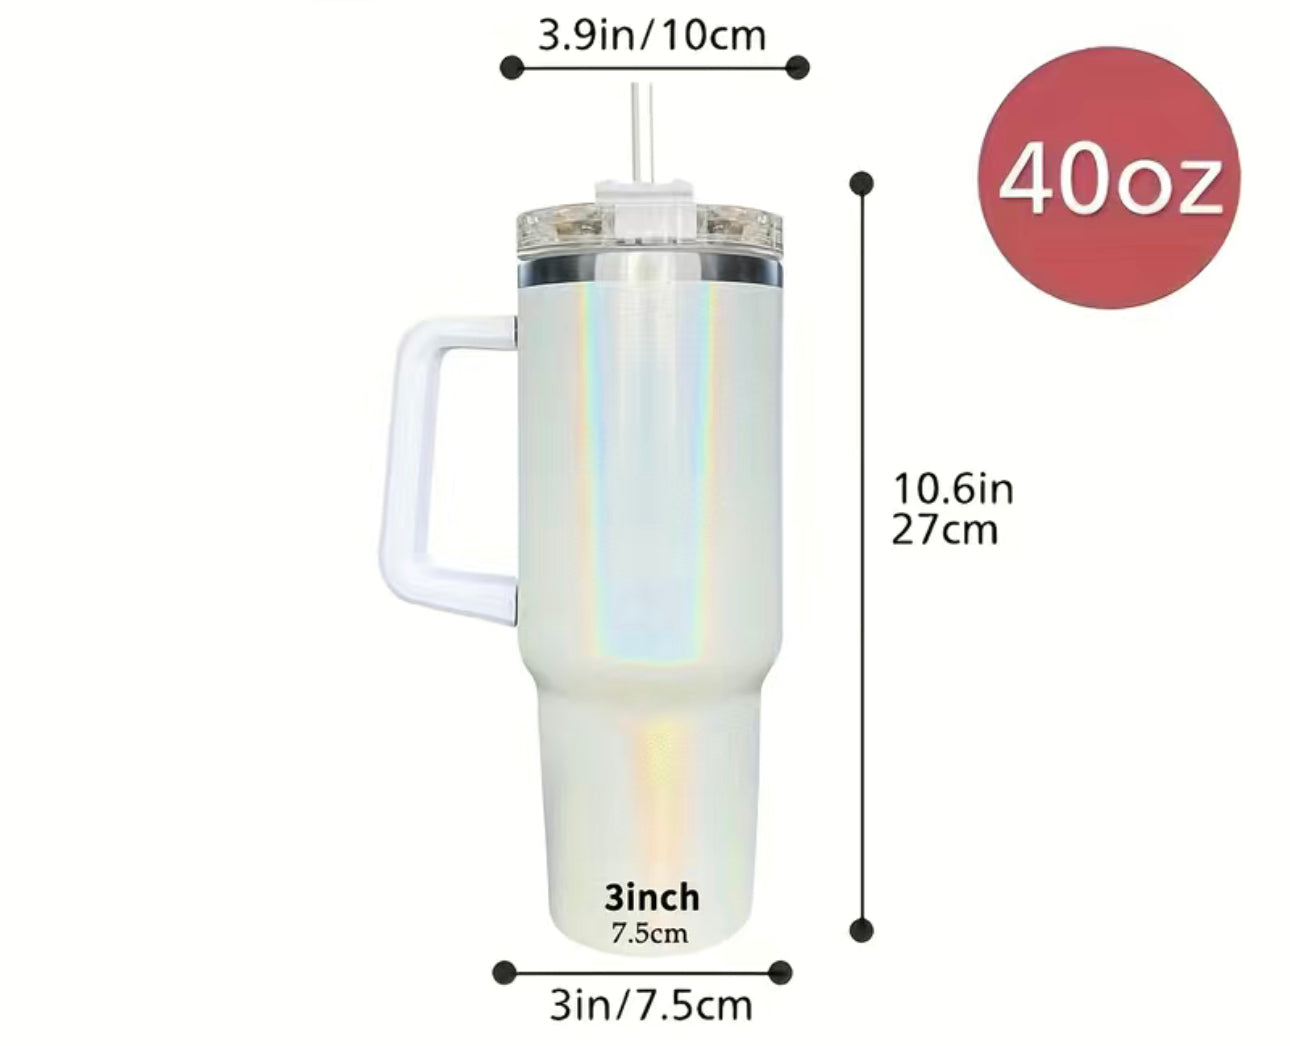 Have the Day you Deserve colorful tumbler, 40 oz metal tumbler with  handle, Have the Day you Deserve, metal tumbler with straw